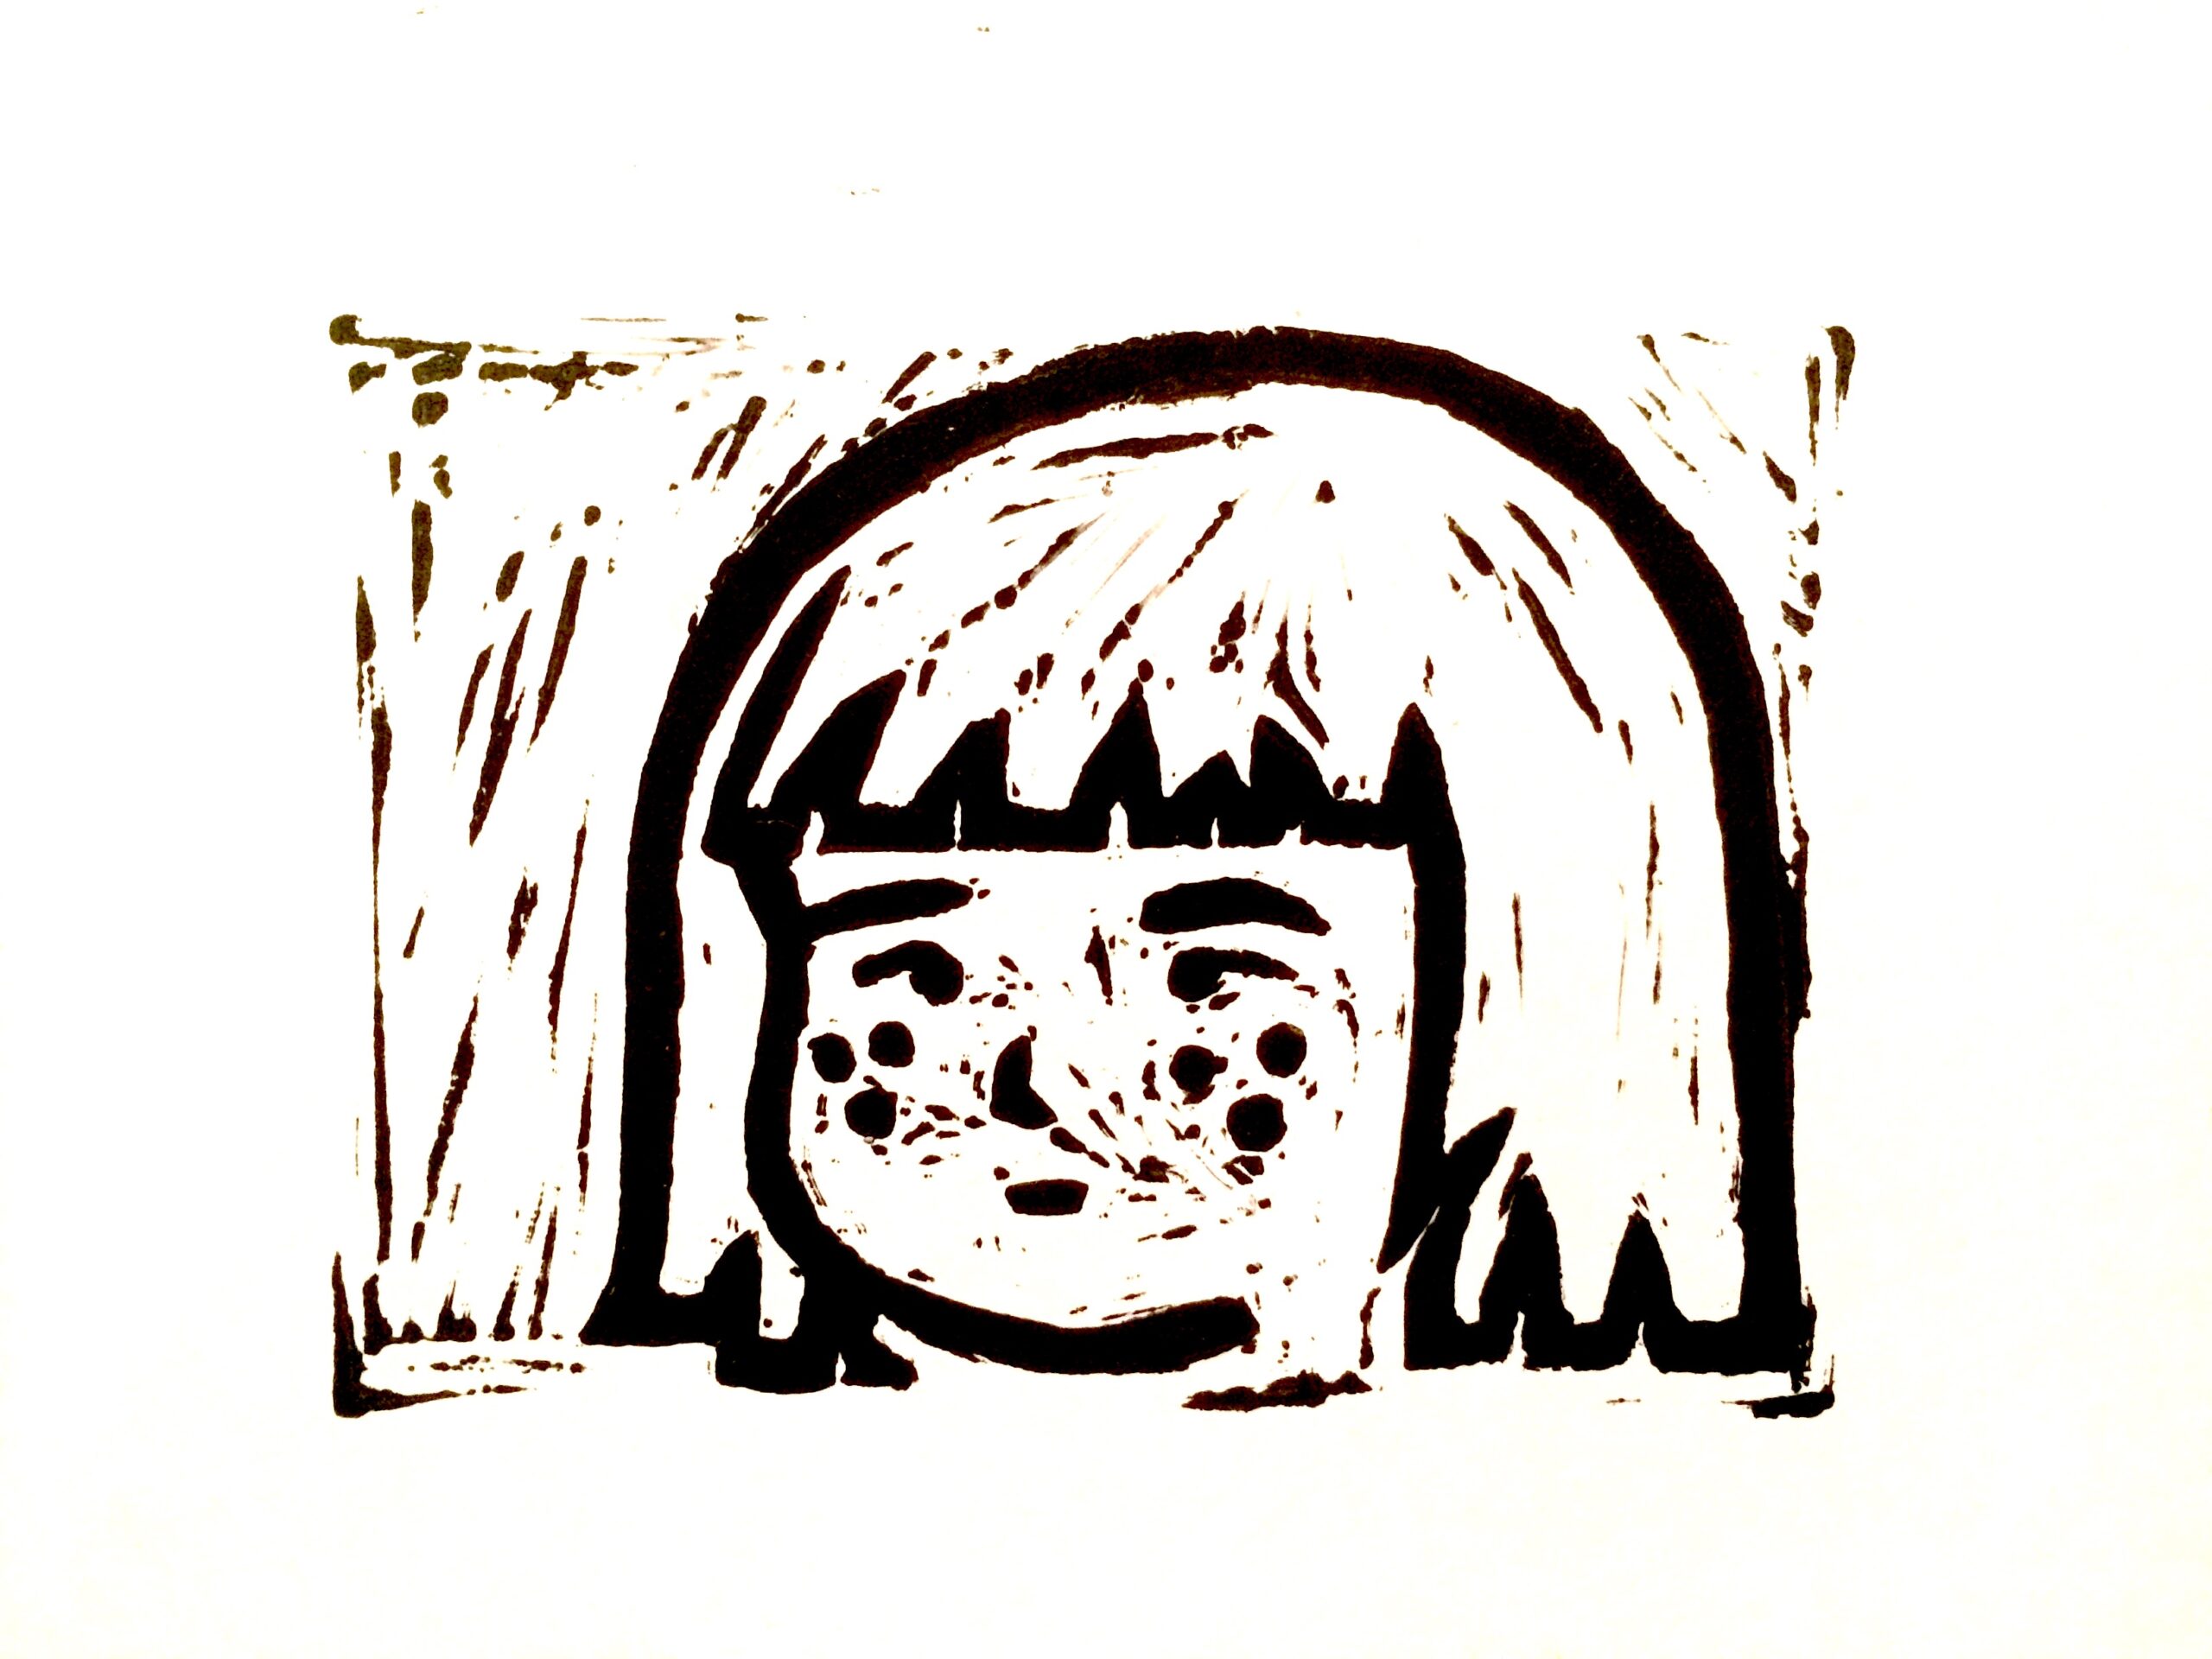 A linocut image, in black, against a white background, of a young girl, with straight, chin-length hair, bangs, and freckles across her cheeks.